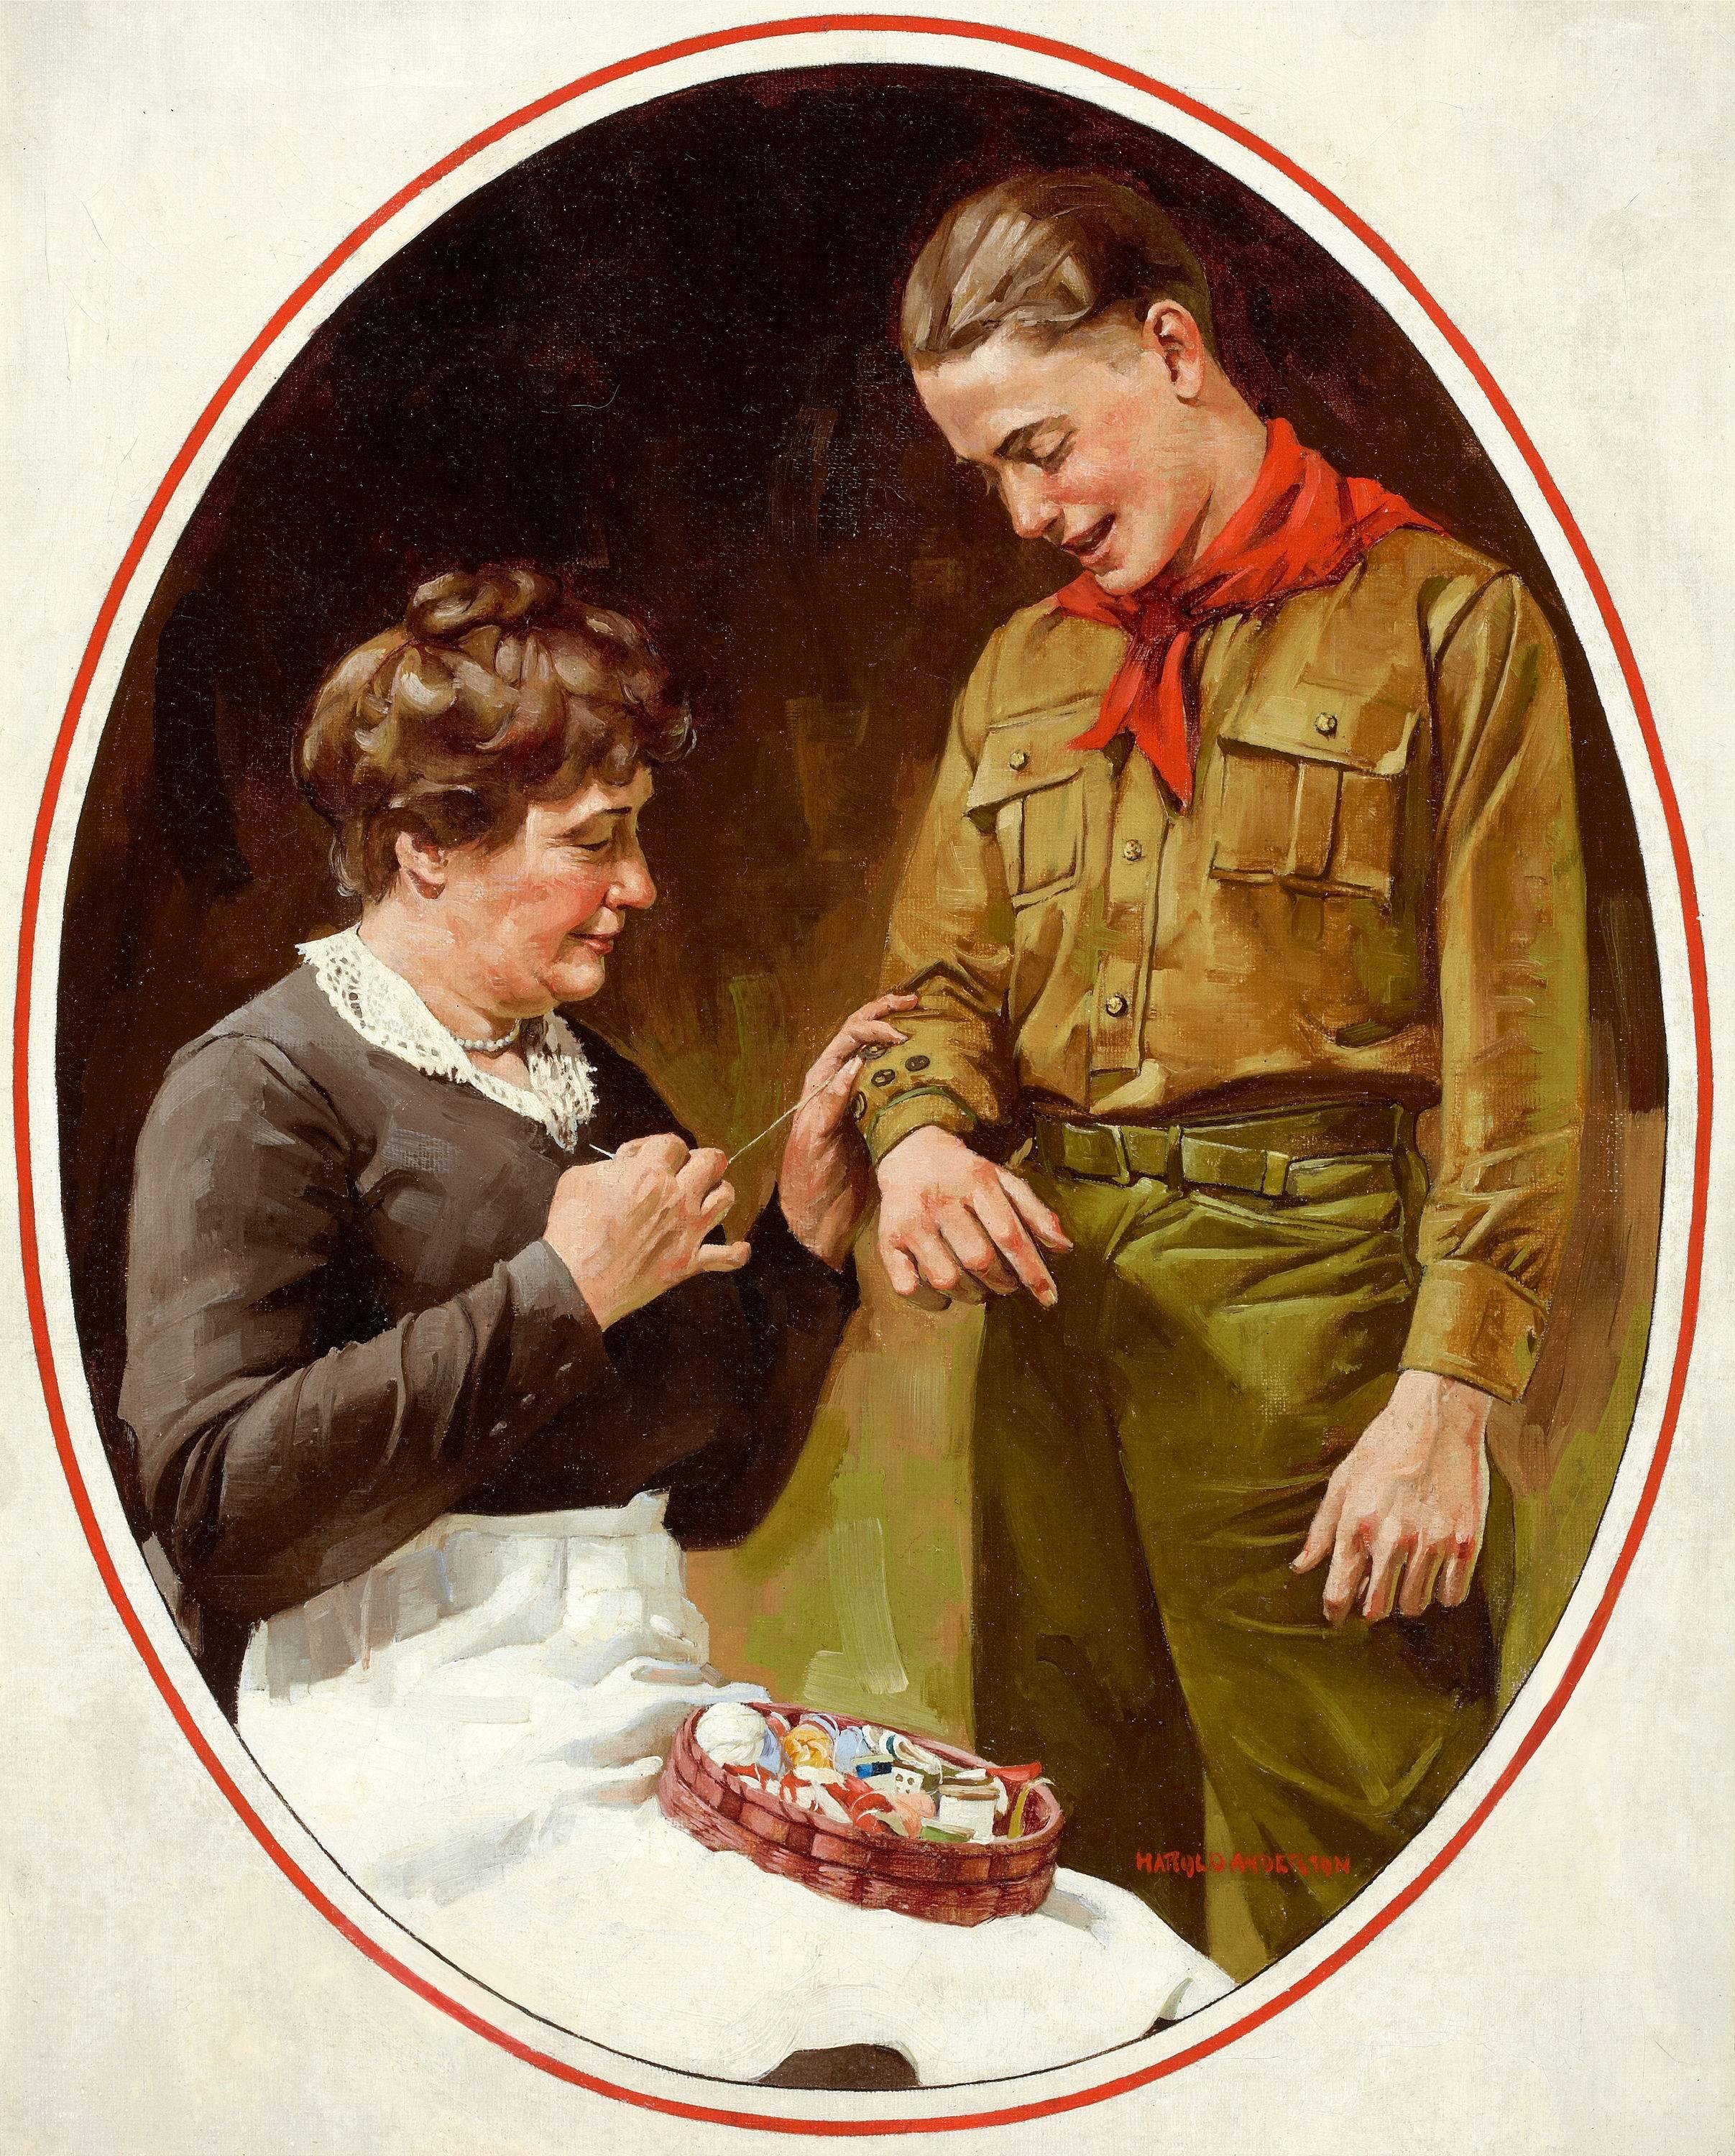 Mending the Shirt, Zeitschriftencover des Magazins Boys Life – Painting von Harold Anderson